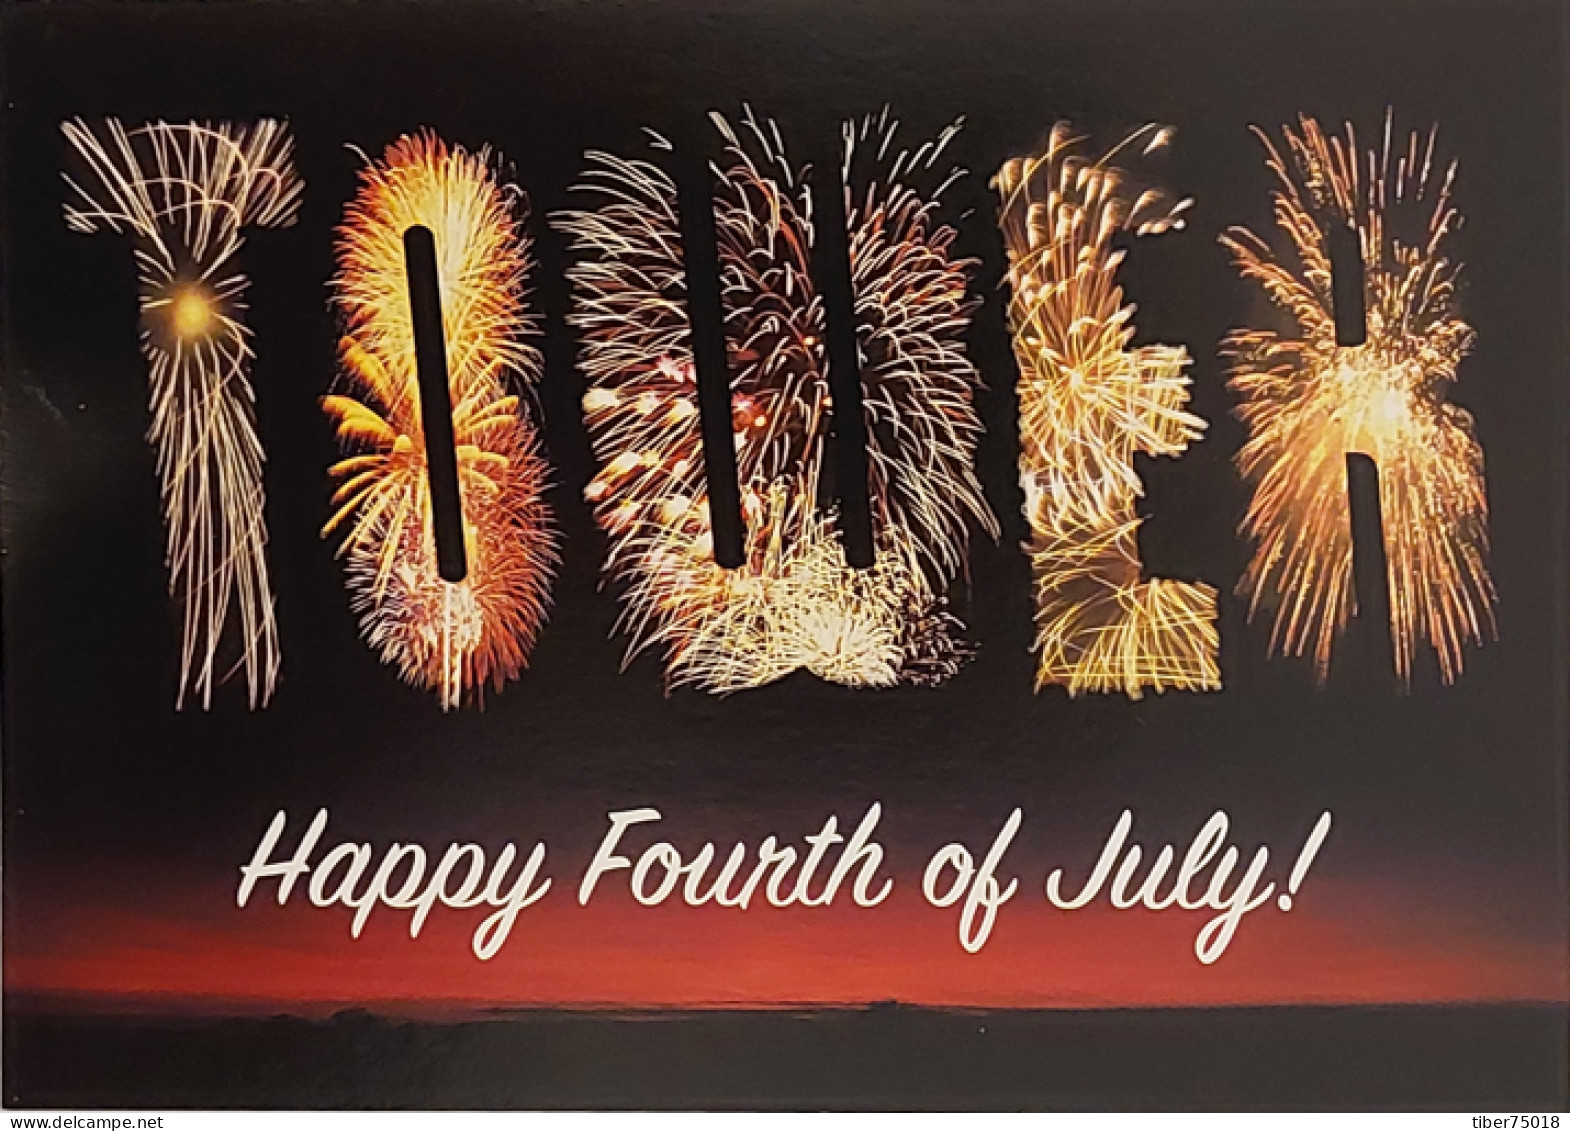 Carte Postale (Tower Records) Illustration : Iris Gilbert (feu D'artifice) Happy Fourth Of July ! - Advertising